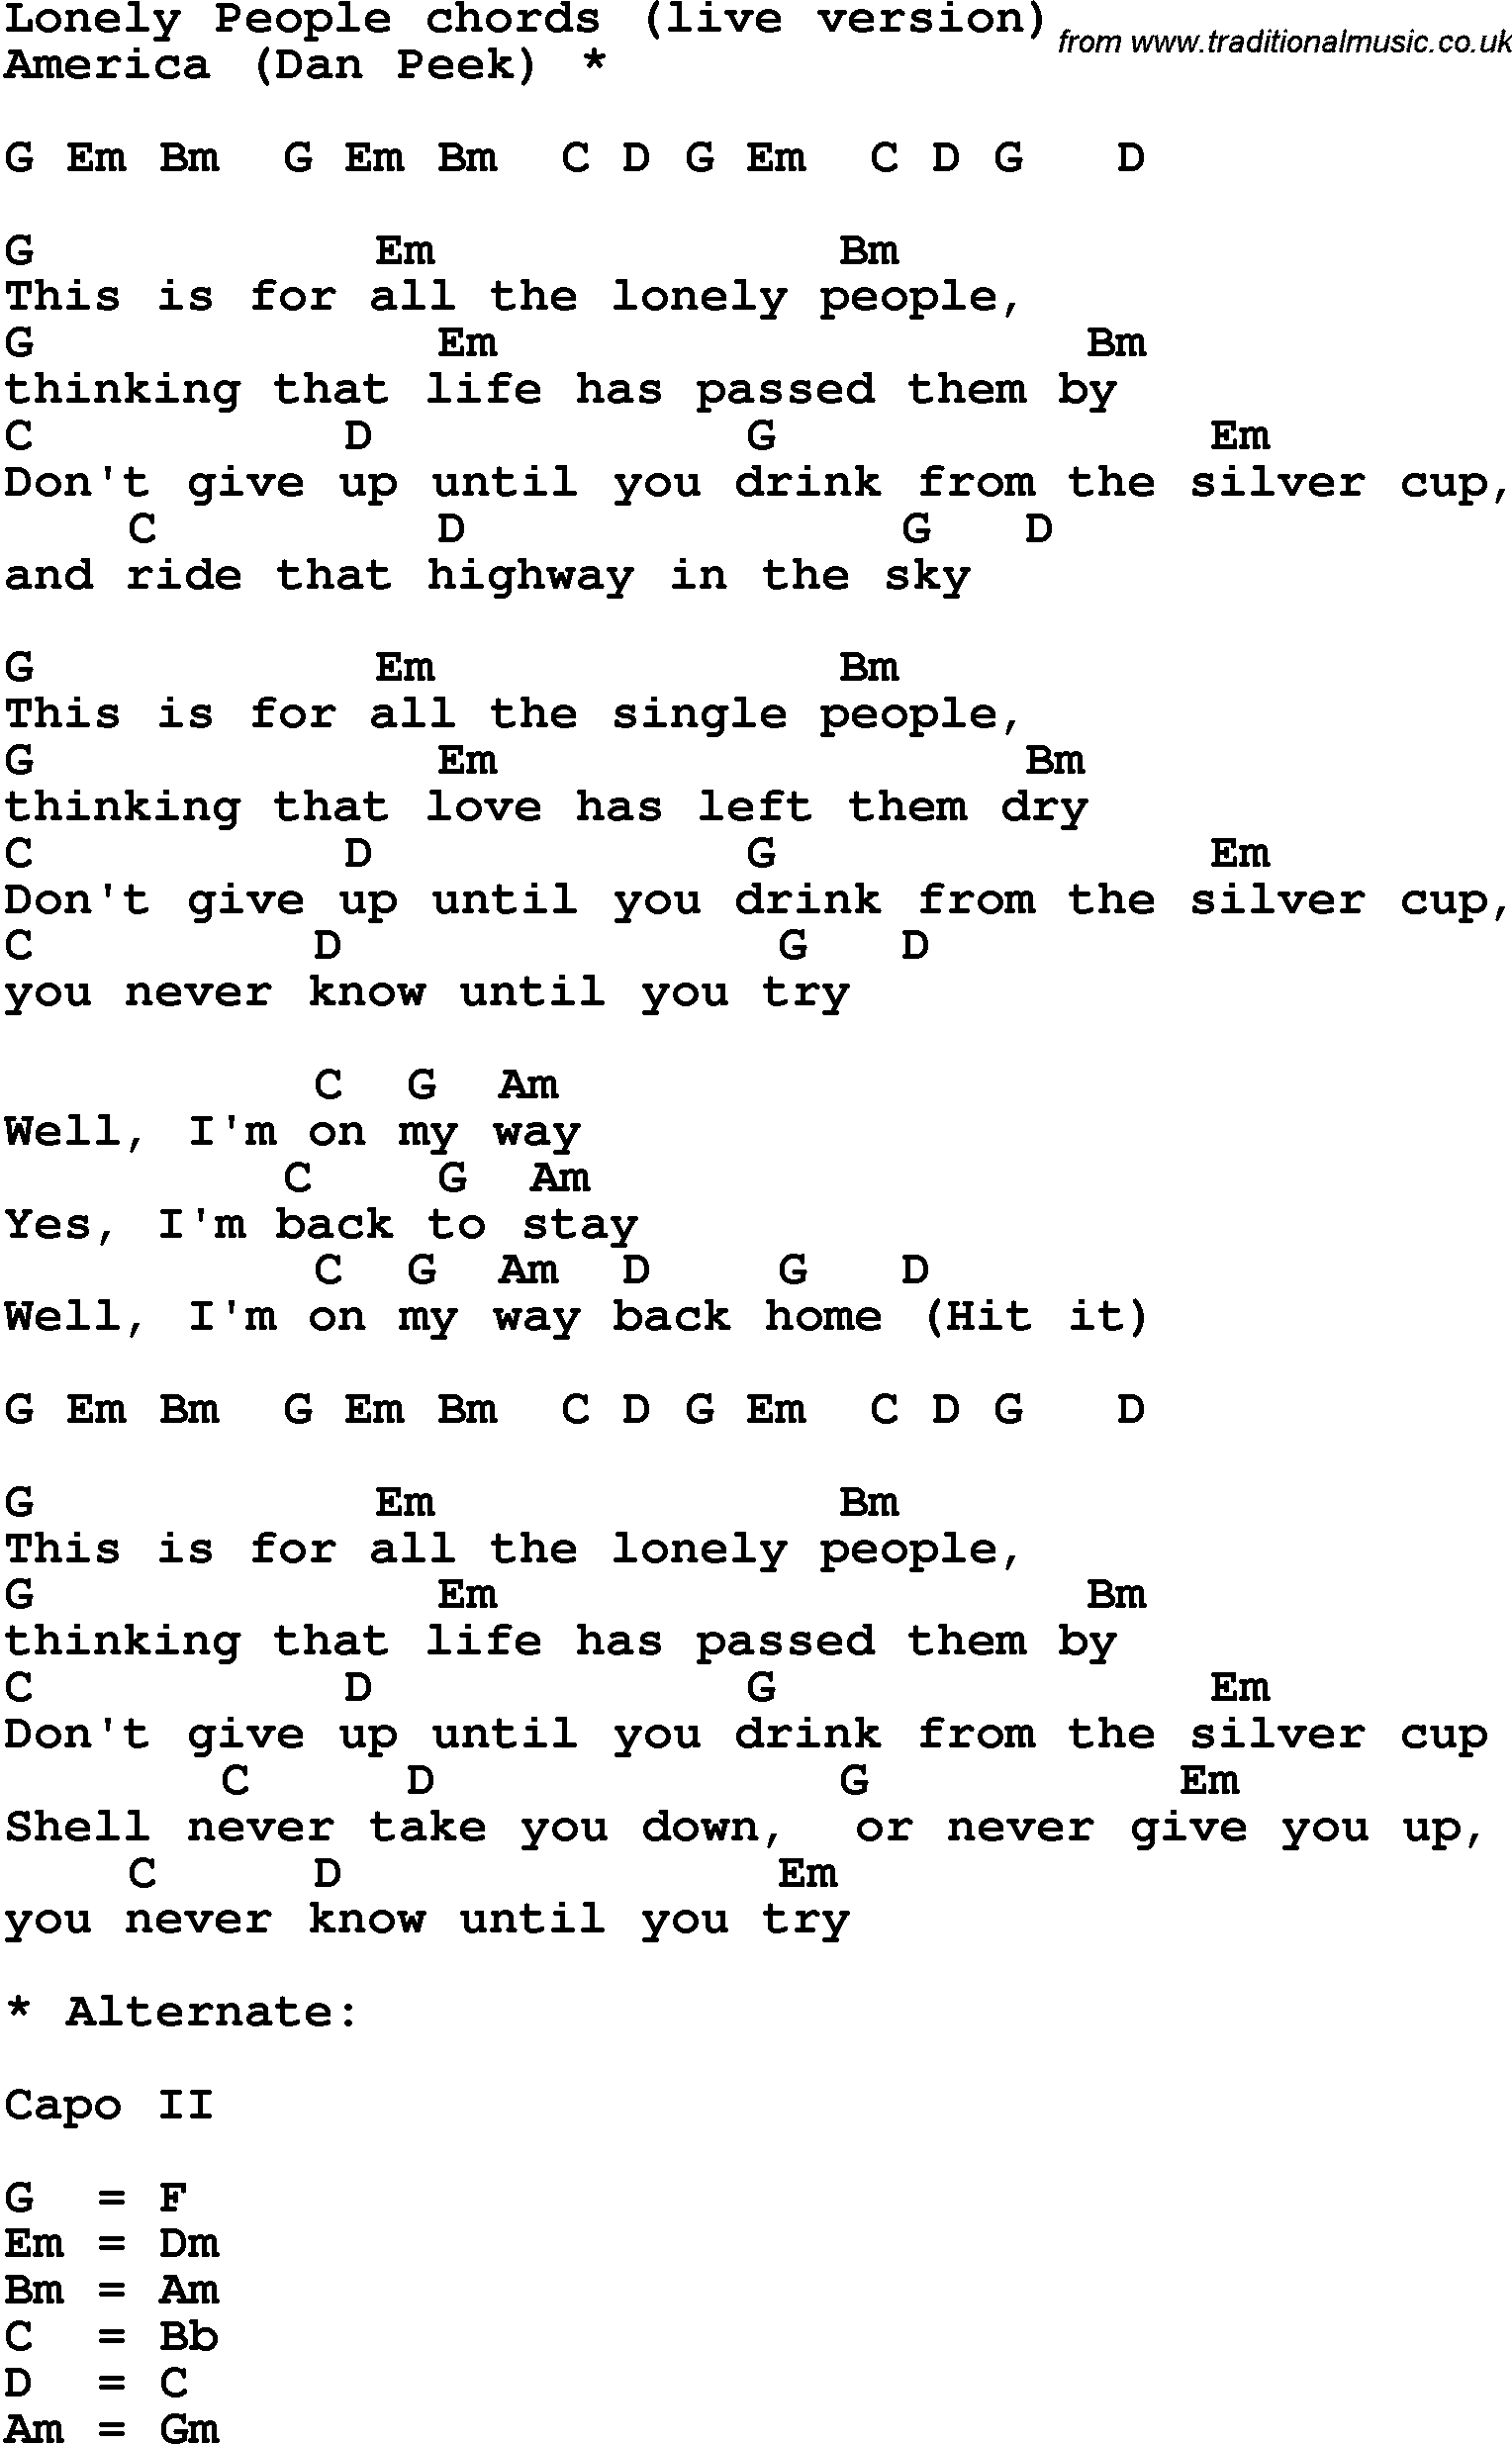 Song Lyrics with guitar chords for Lonely People